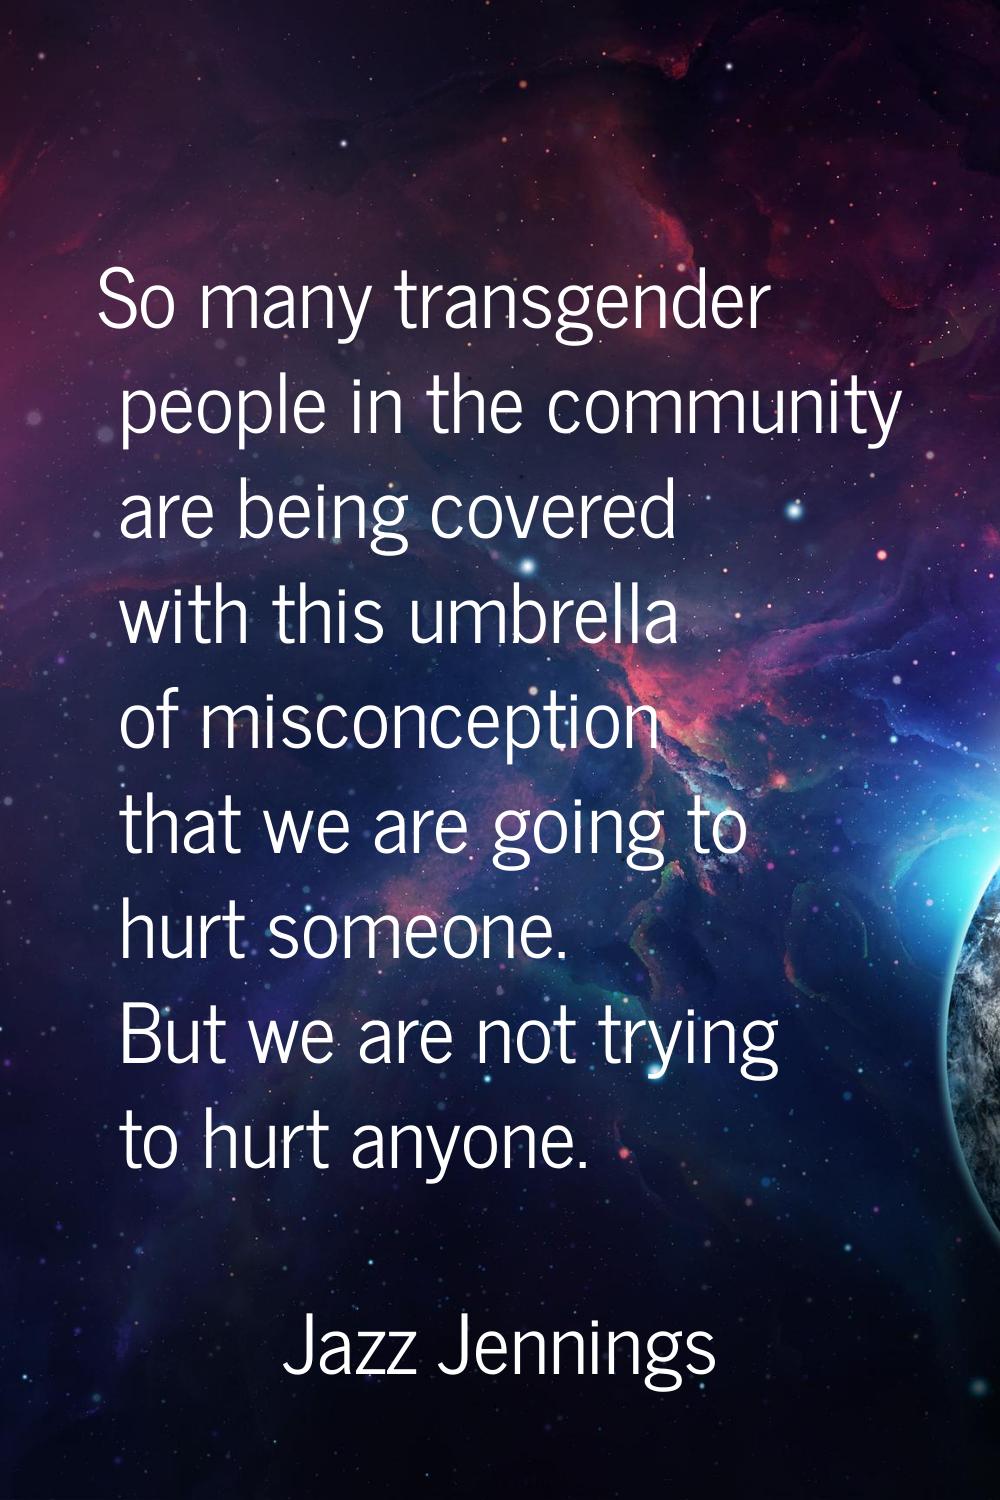 So many transgender people in the community are being covered with this umbrella of misconception t